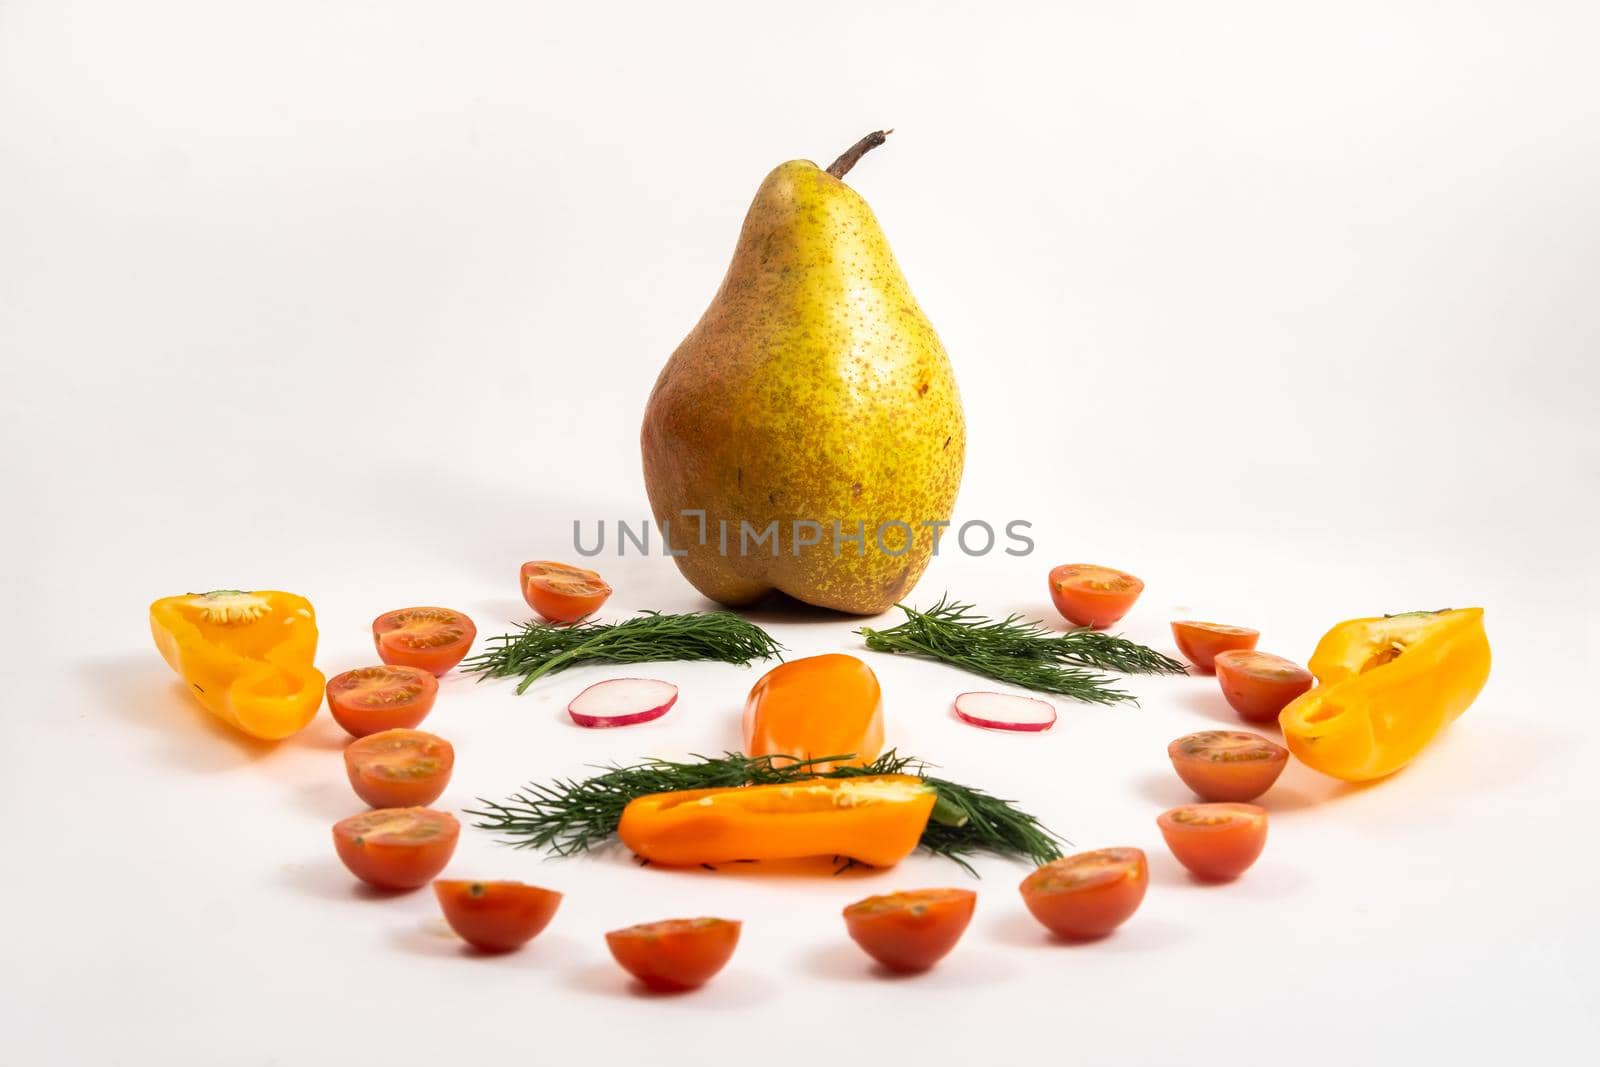 The face of a man made of sliced vegetables and a pear on his head on a white background by Lobachad